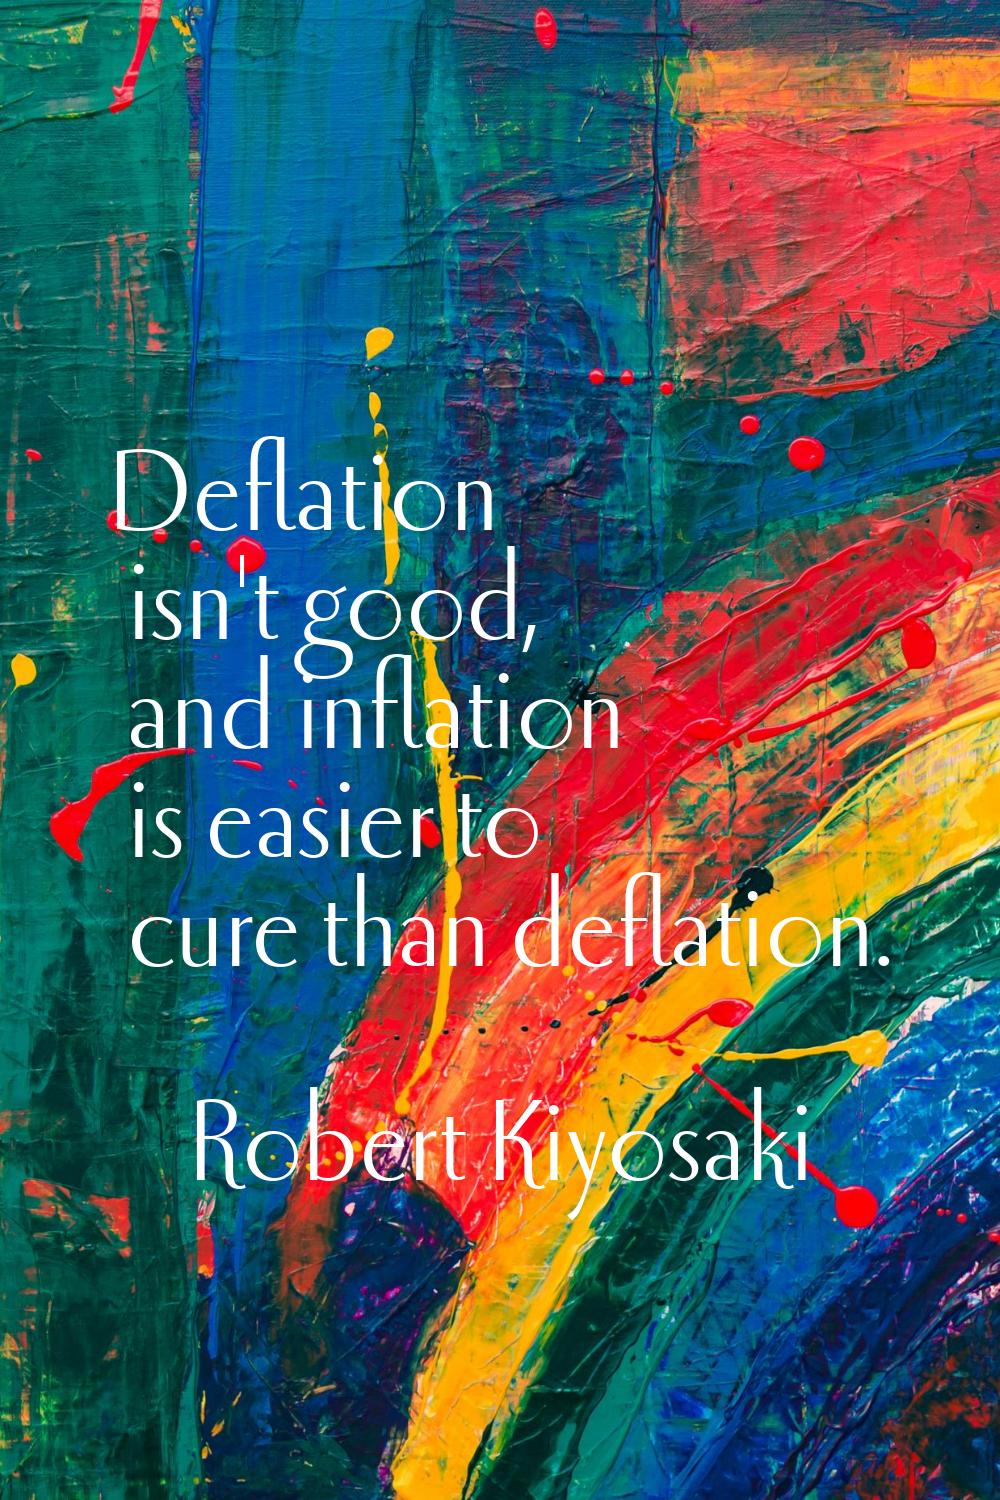 Deflation isn't good, and inflation is easier to cure than deflation.